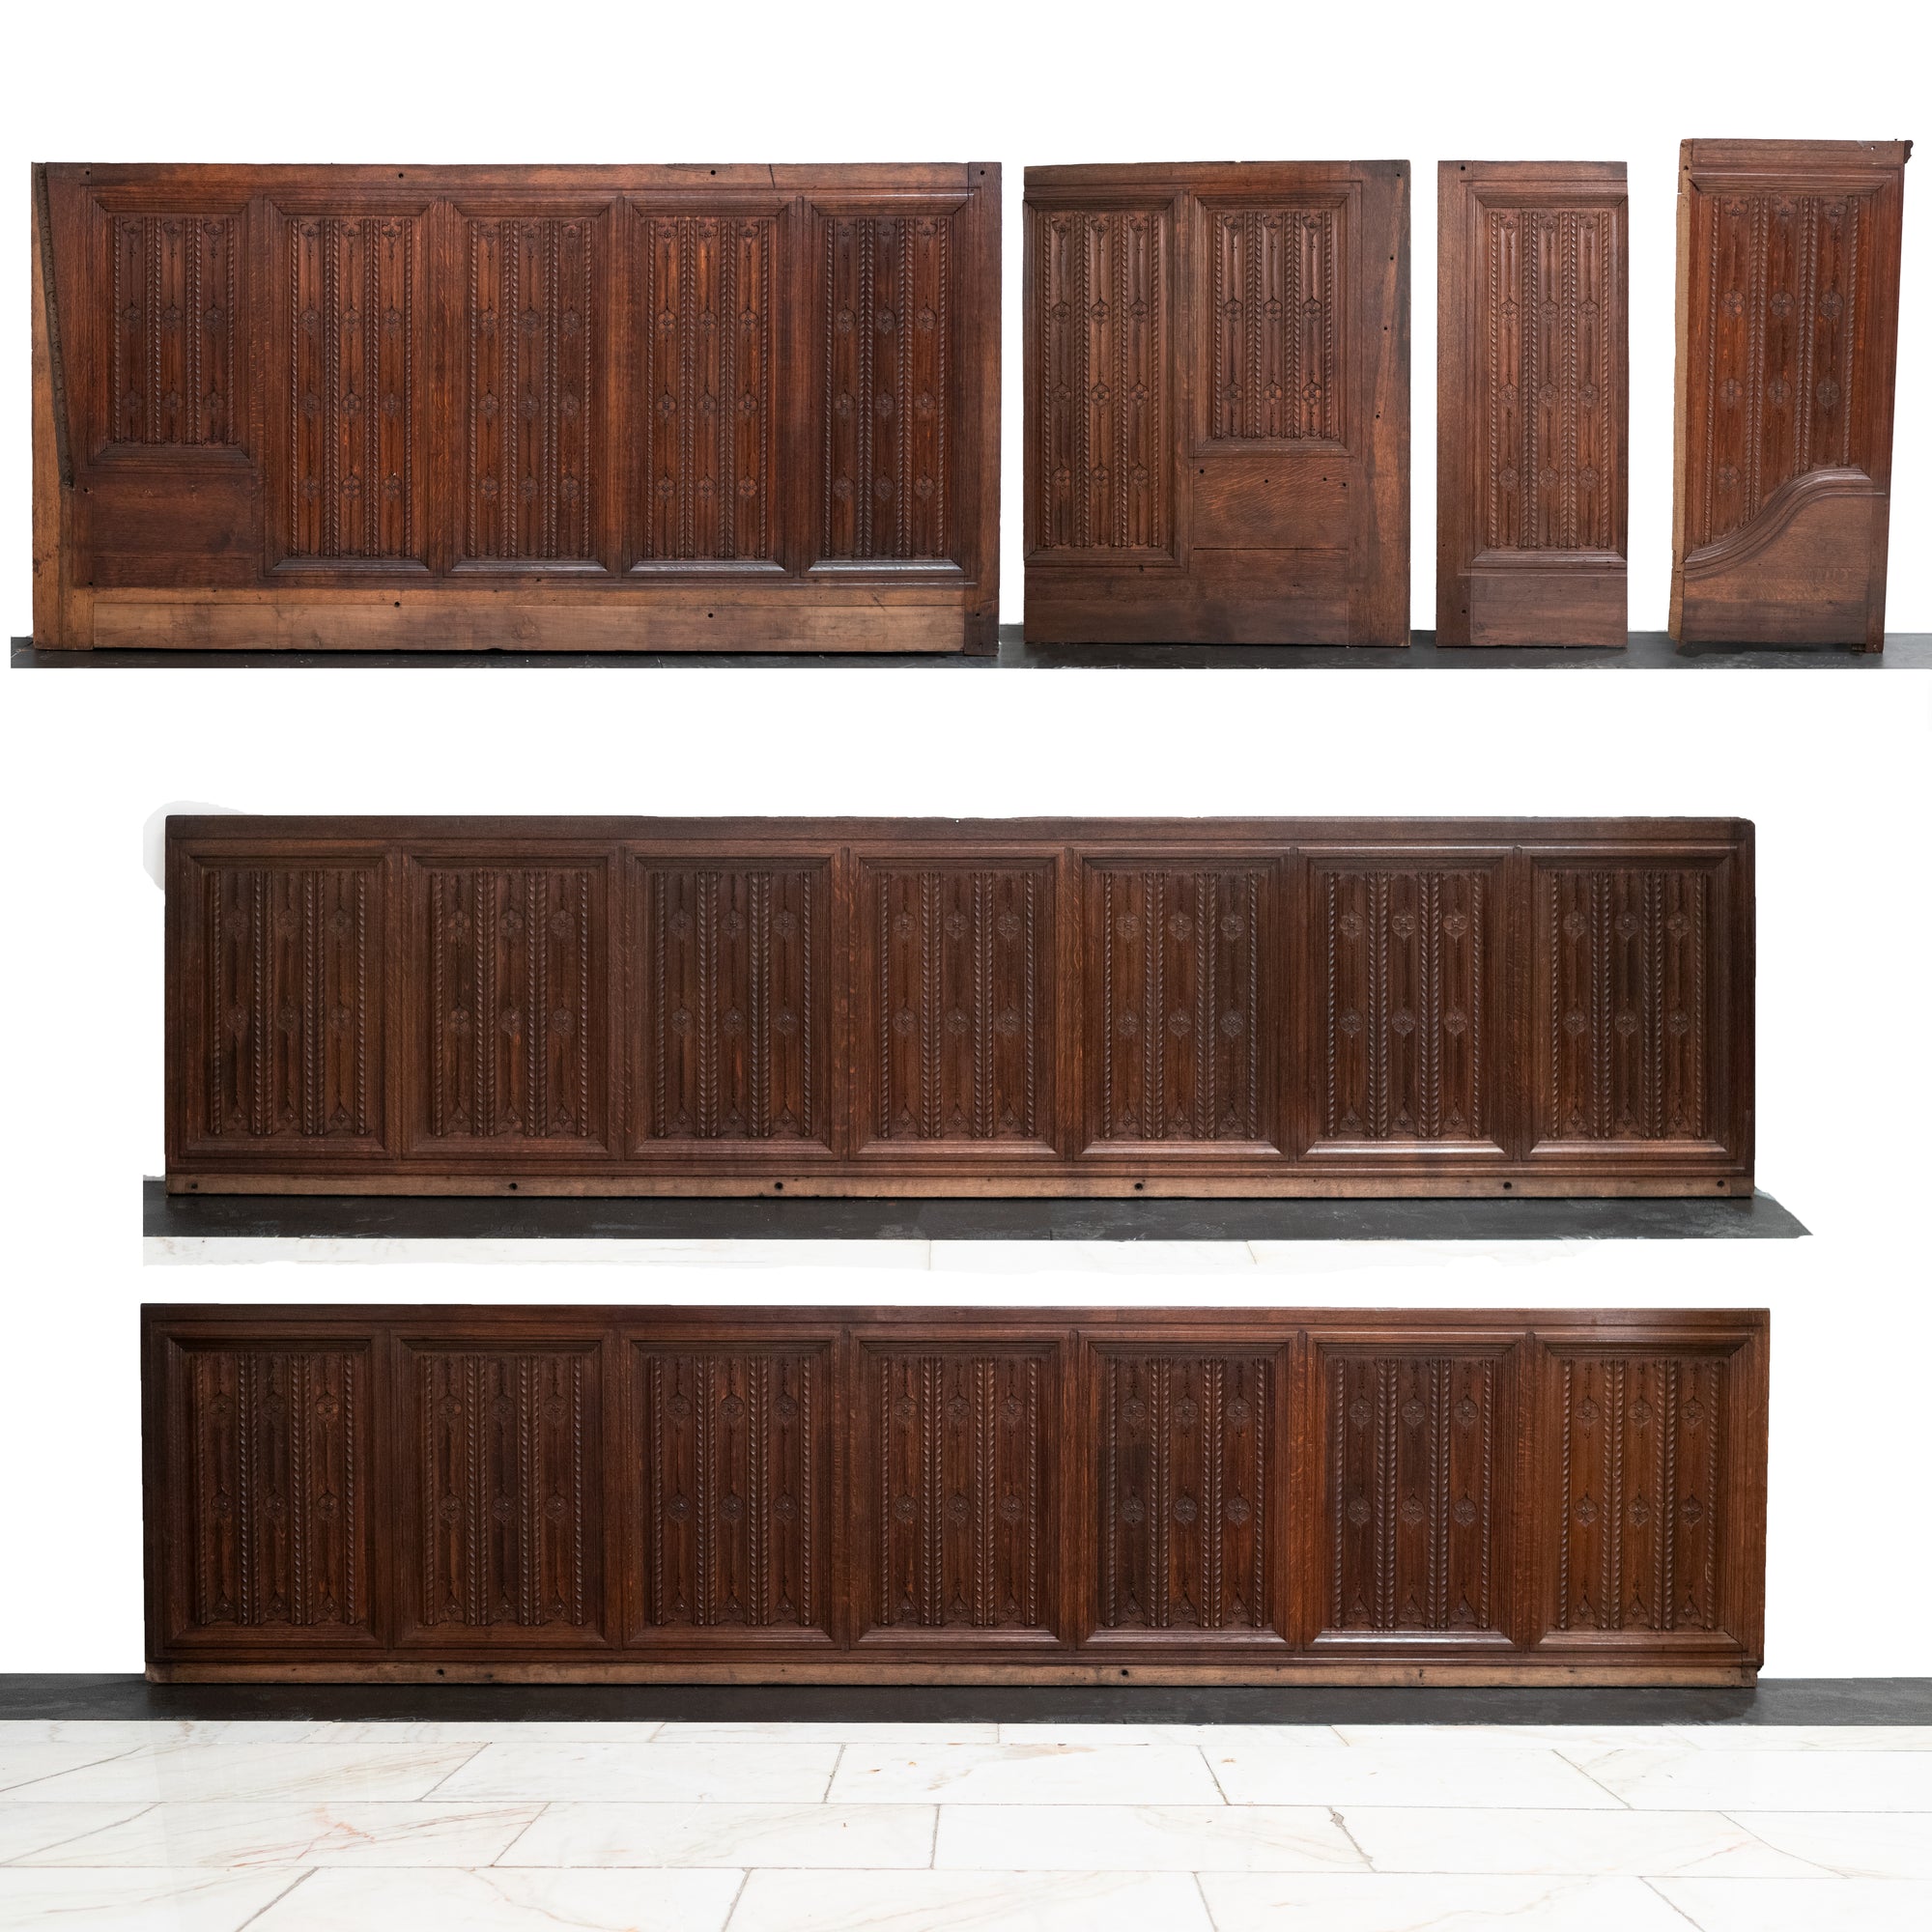 Antique Mid 19th Century Carved Linenfold Oak Panelling | The Architectural Forum